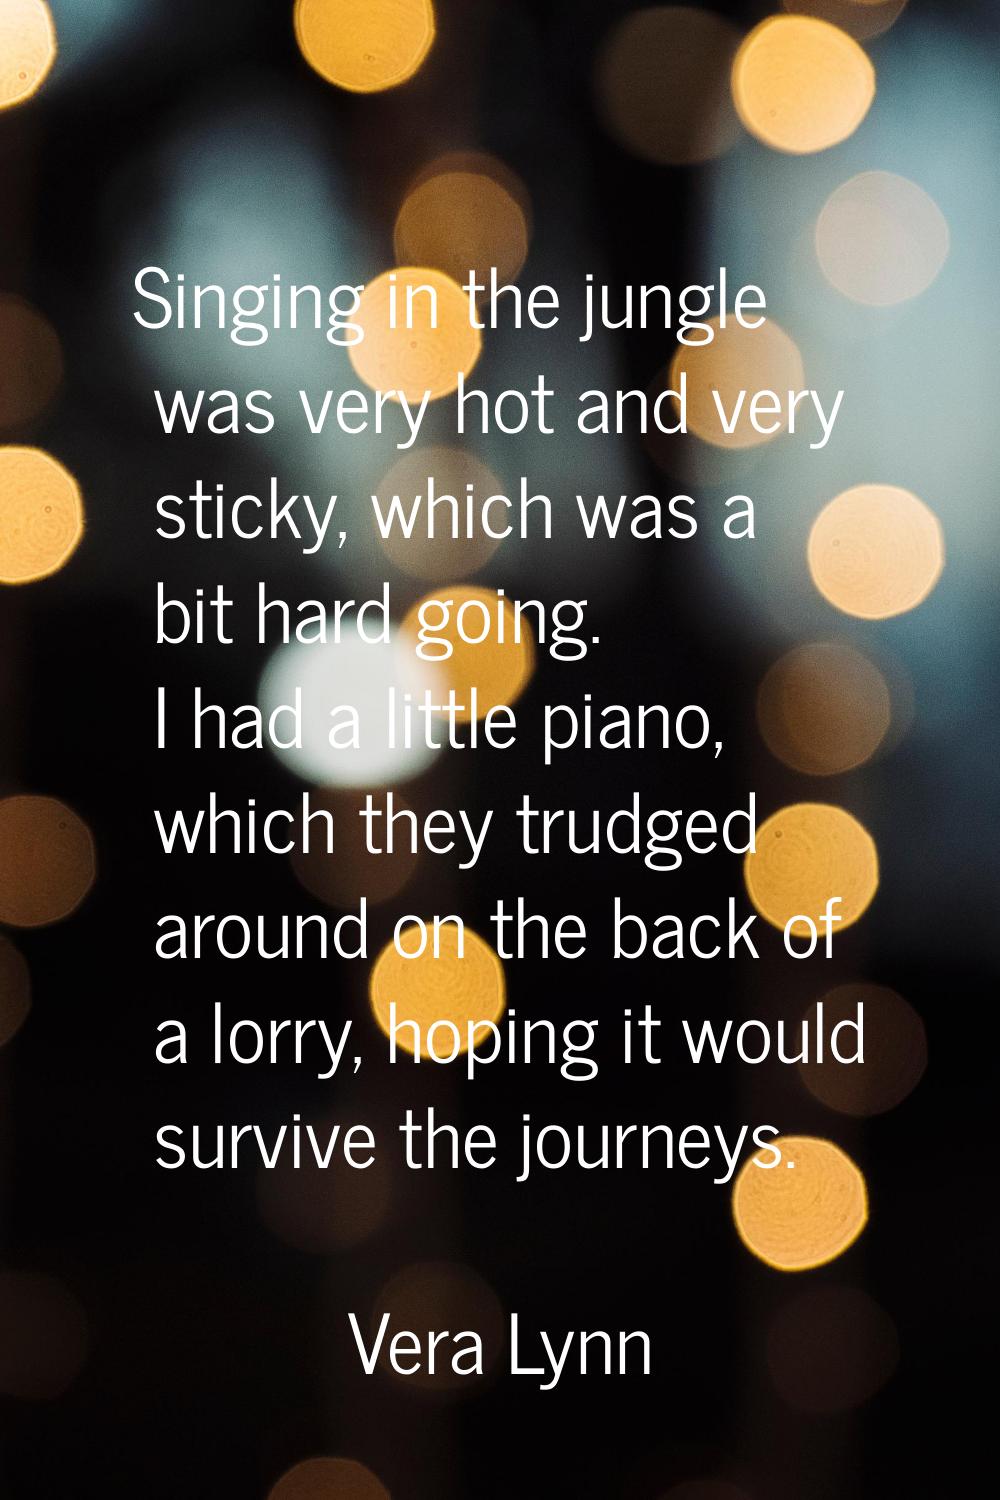 Singing in the jungle was very hot and very sticky, which was a bit hard going. I had a little pian